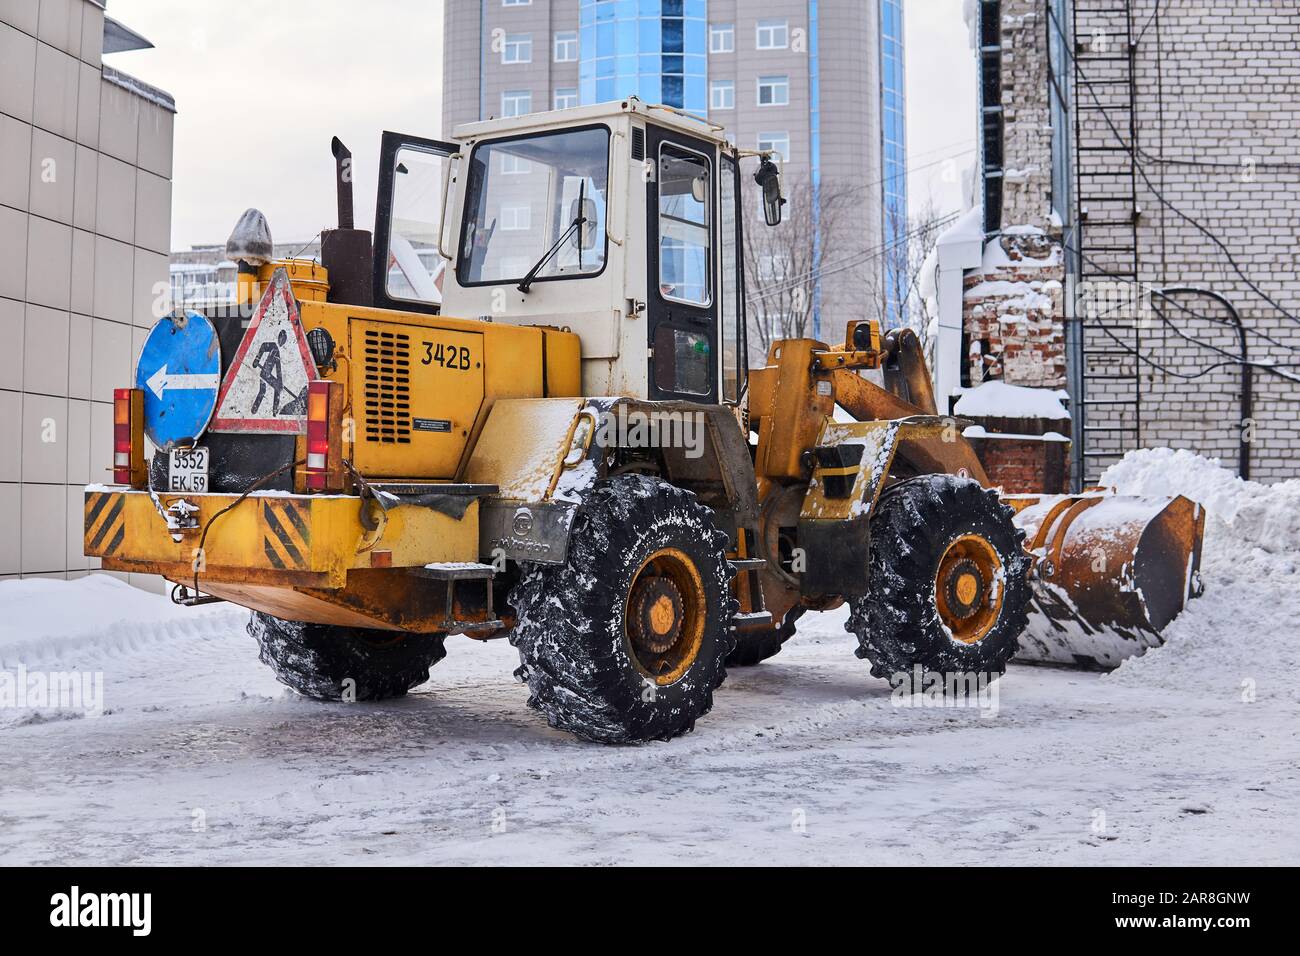 Perm, Russia - Jauary 26, 2020: snow removing loader stands in a city courtyard Stock Photo